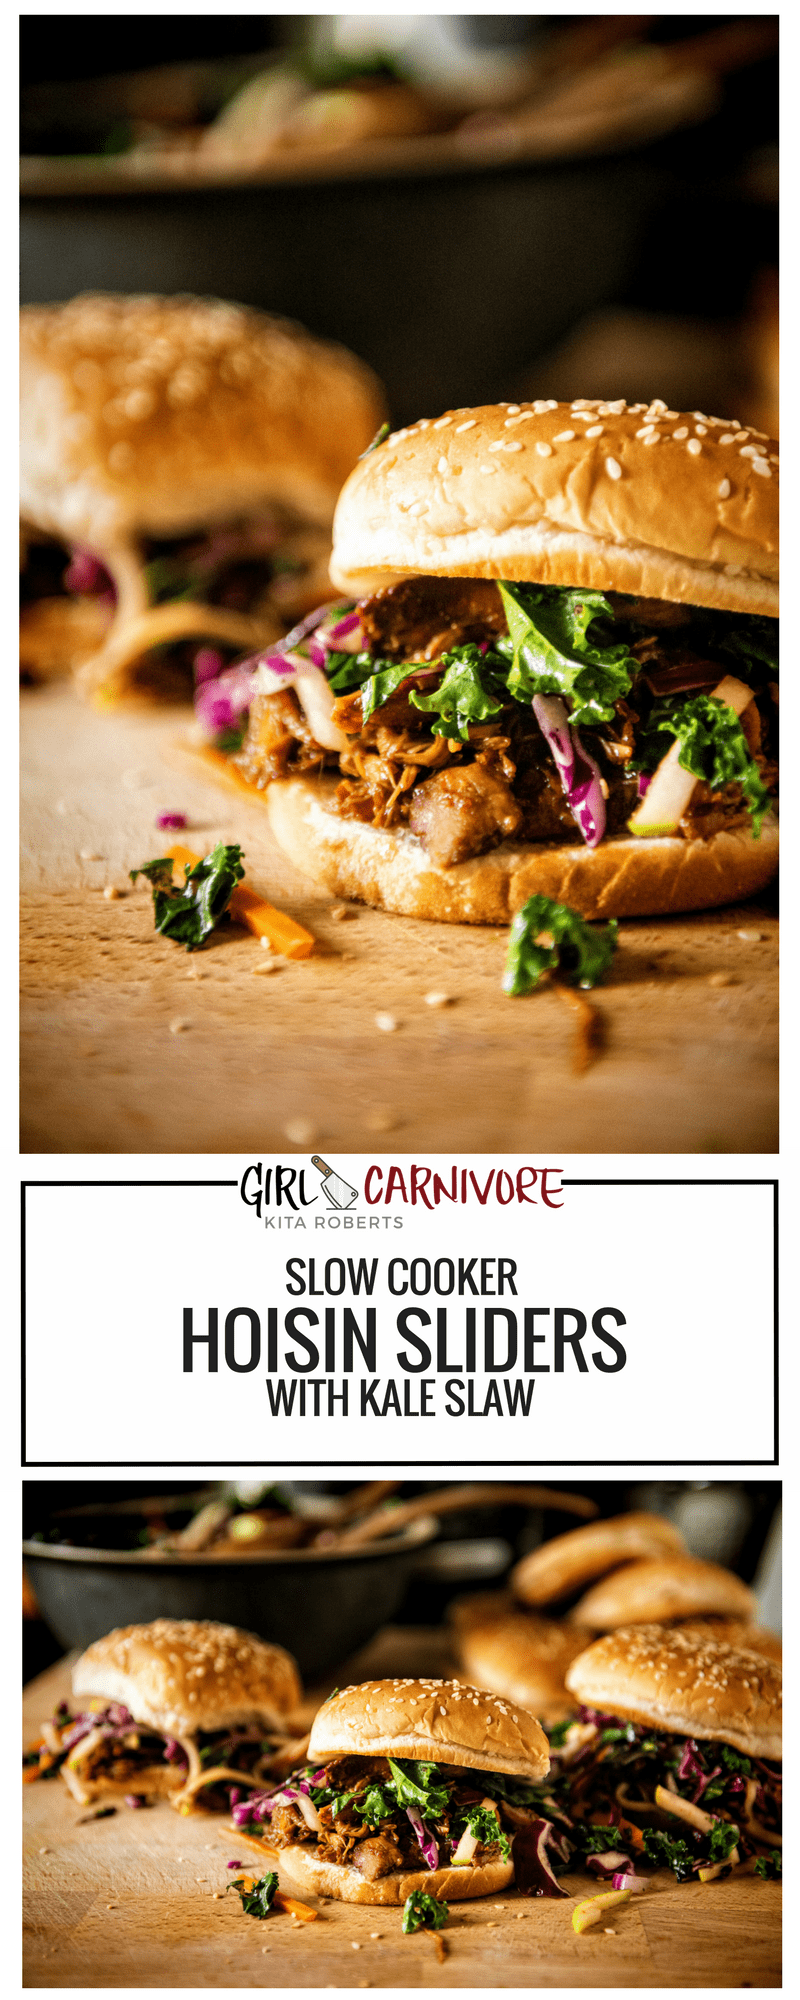 Slow Cooker Hoisin Sliders with Kale Slaw | Easy meal prep with fork tender pork in the slow cooker and a quick apple kale slaw for the perfect recipe for foodball or fast weeknight meal